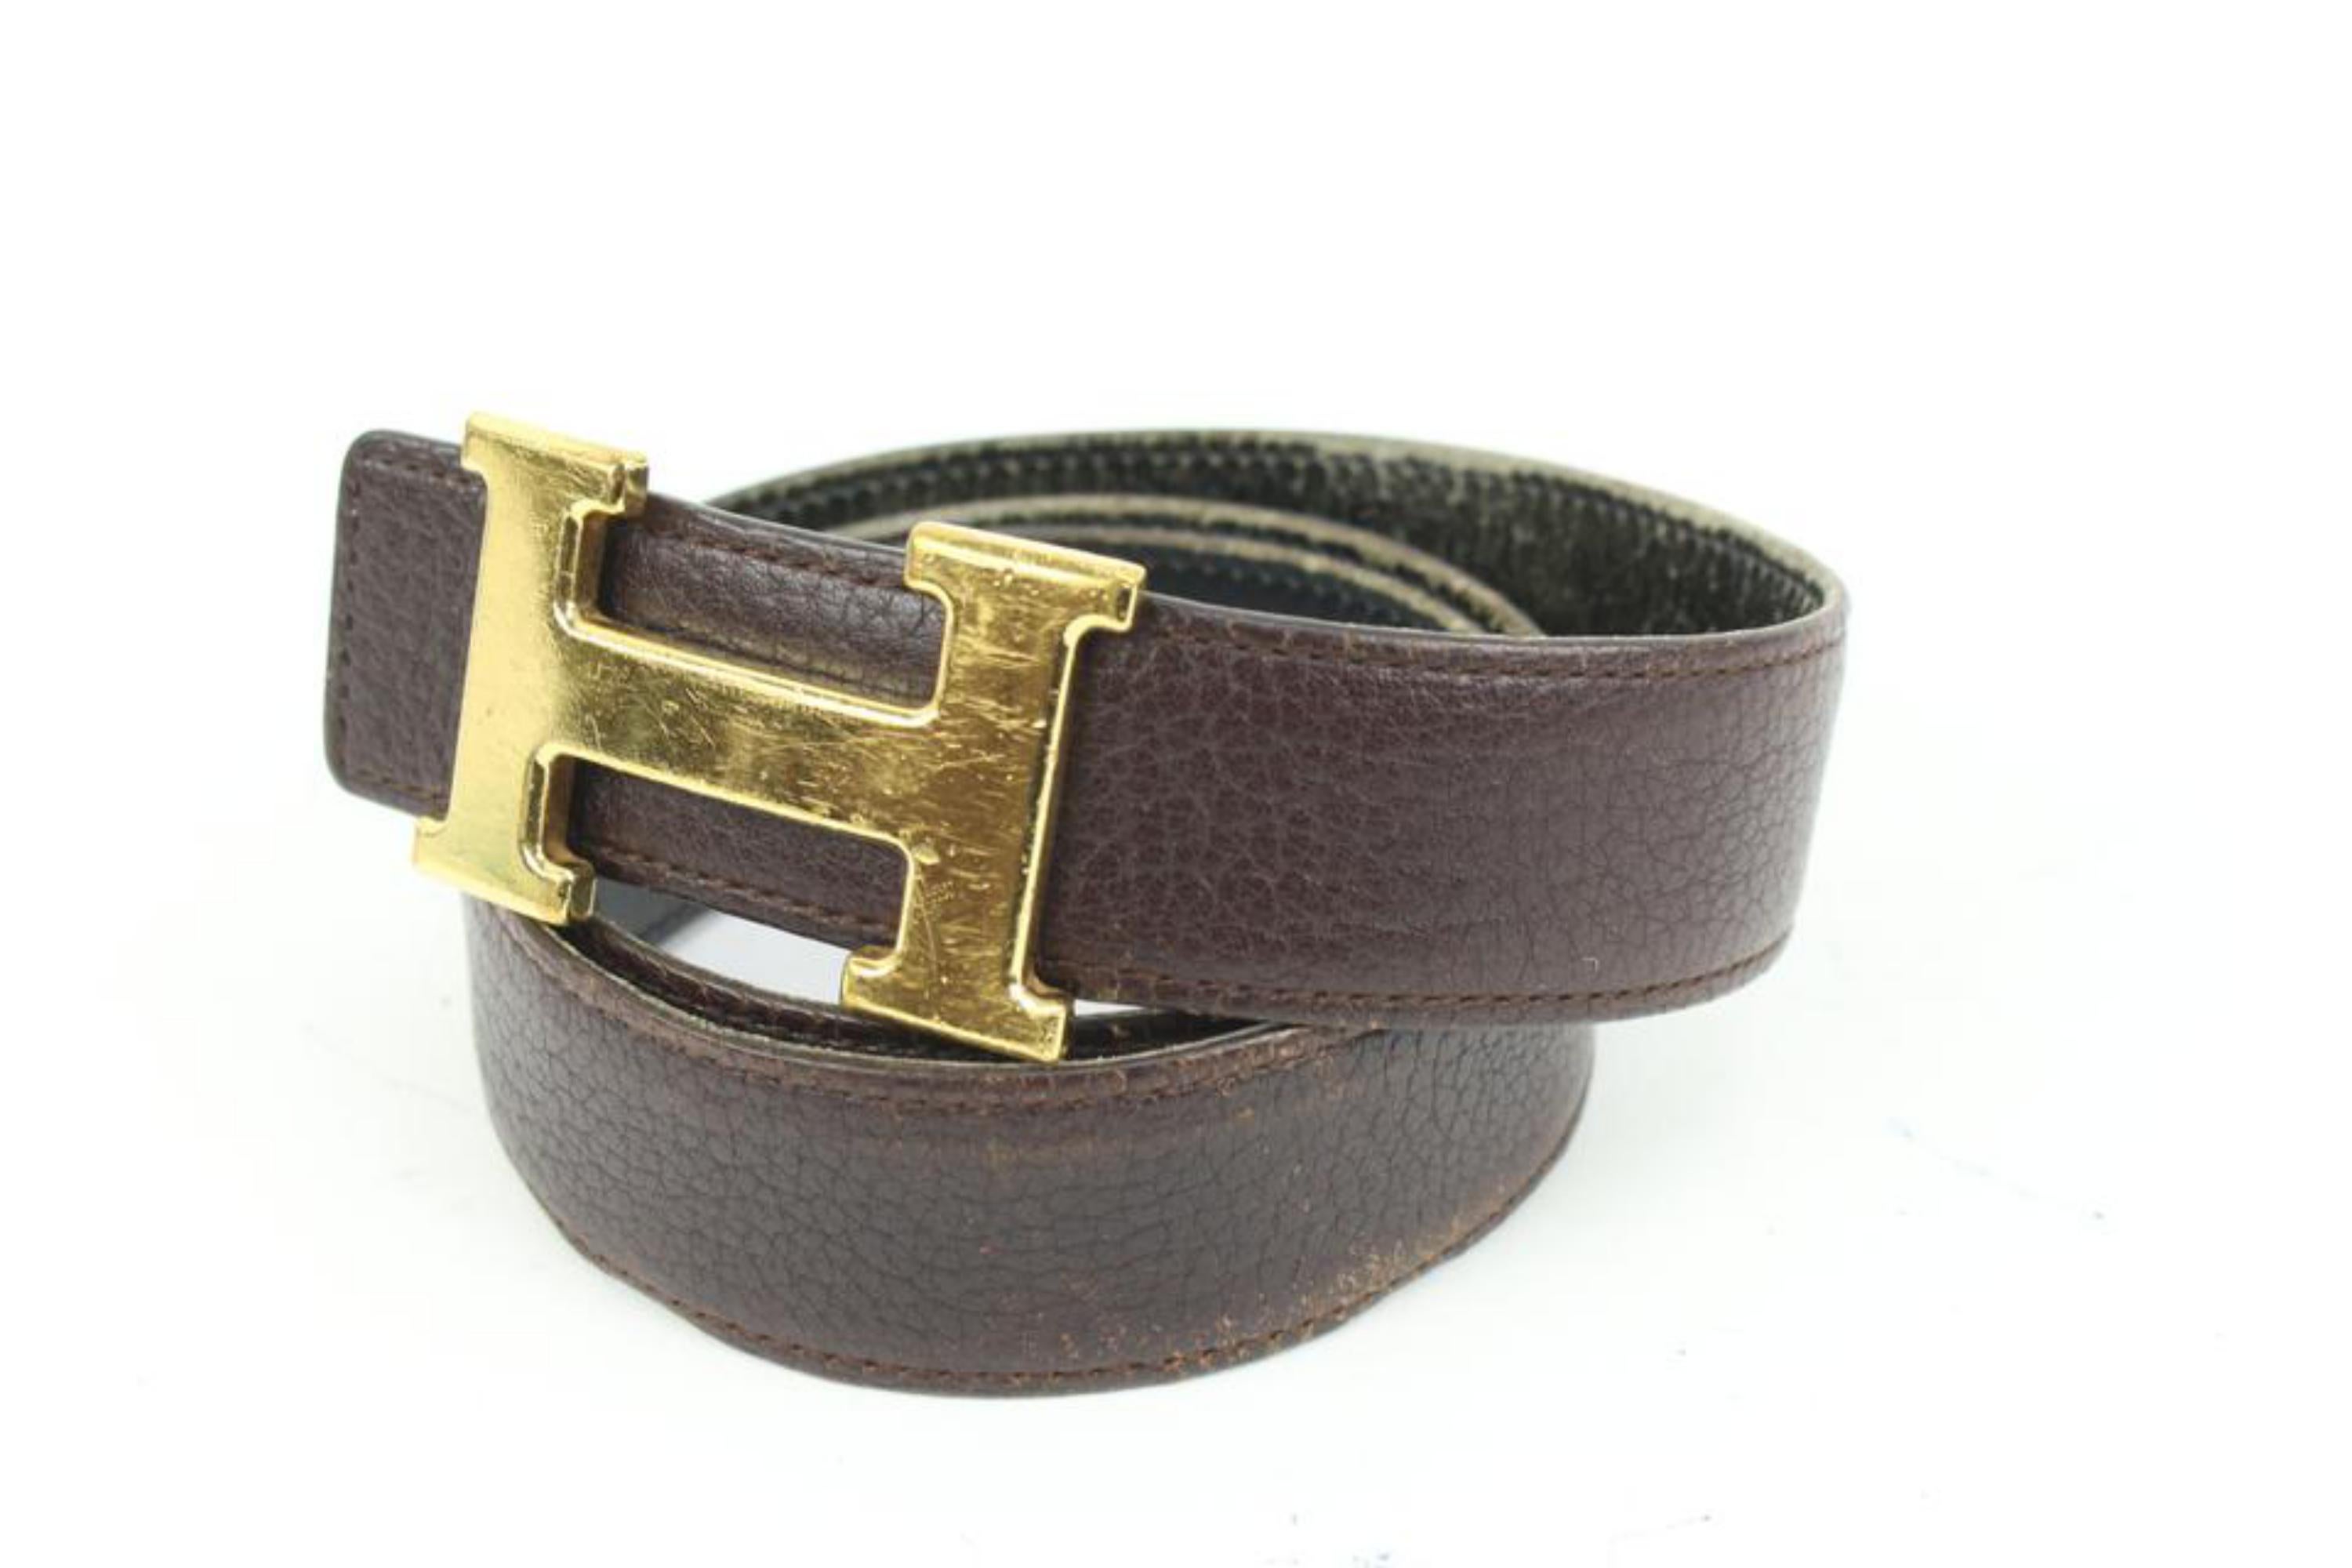 Hermès Chocolate Brown x Black x Gold 32mm Reversible H Logo Belt Kit 91h418s
Date Code/Serial Number: E in a Square
Made In: France
Measurements: Length:  36